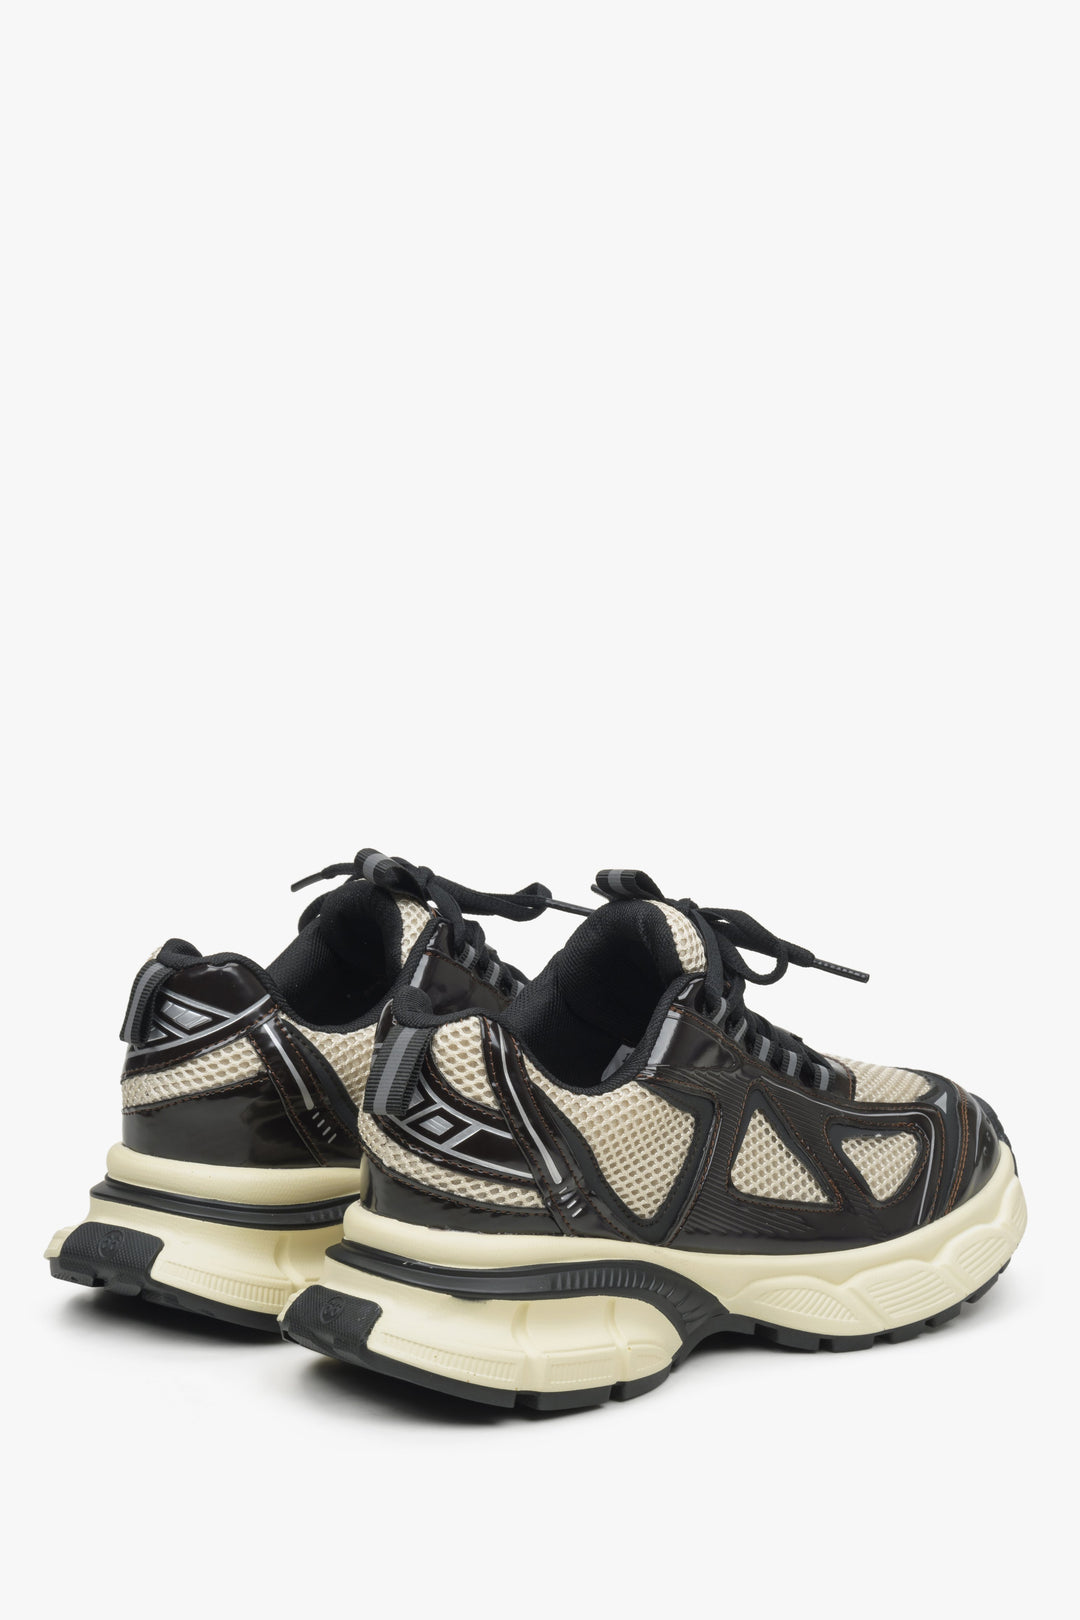 Women's black and beige ES 8 sneakers - presentation of the heel and side line of the shoes.